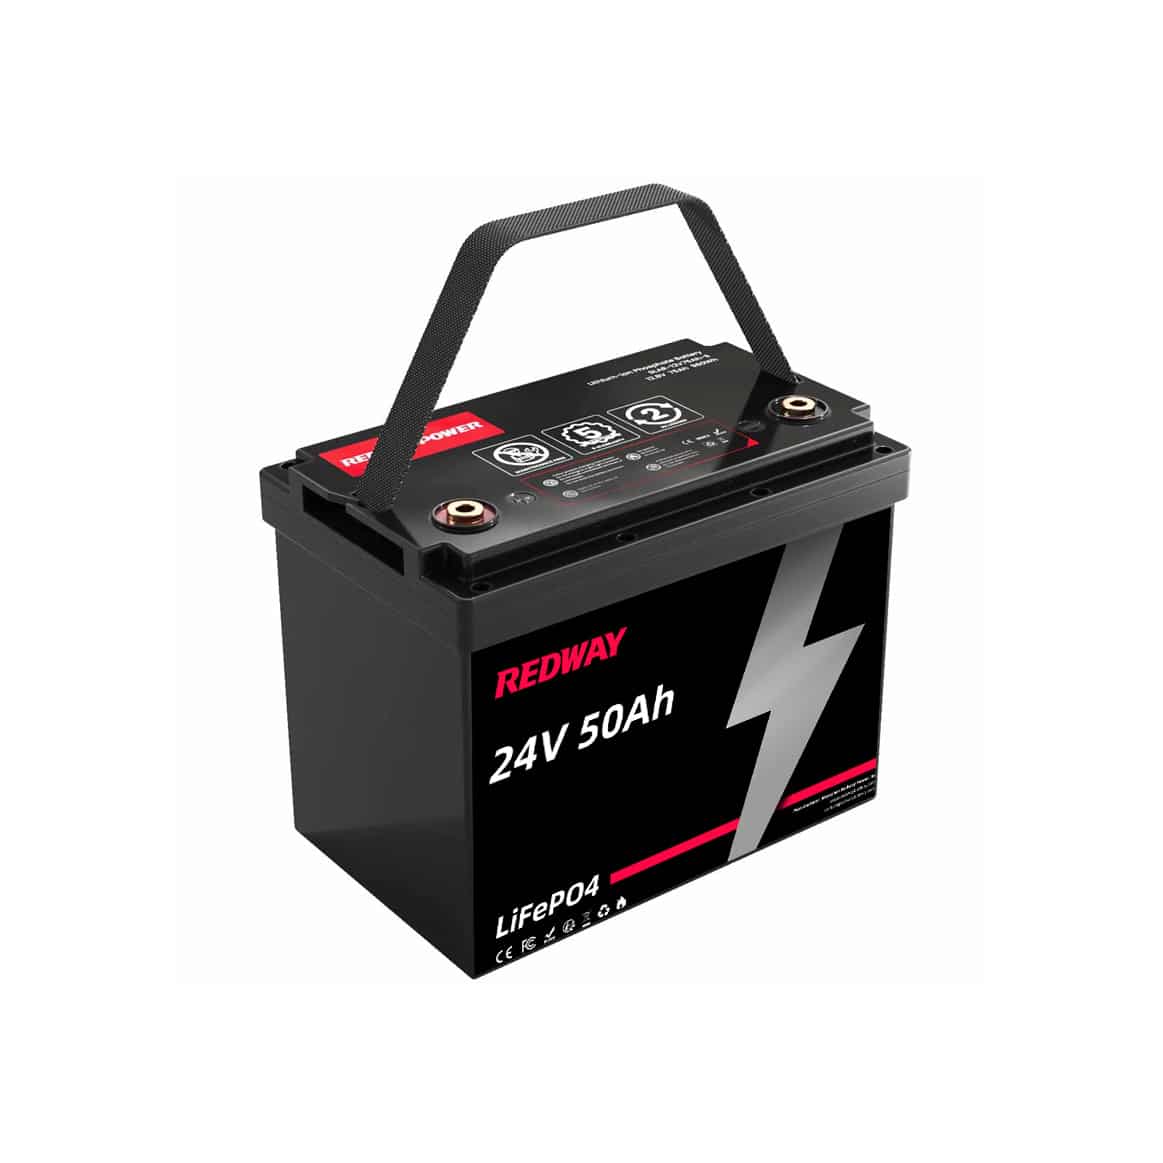 Redway Battery 24V50Ah Lithium Battery (Group 24)